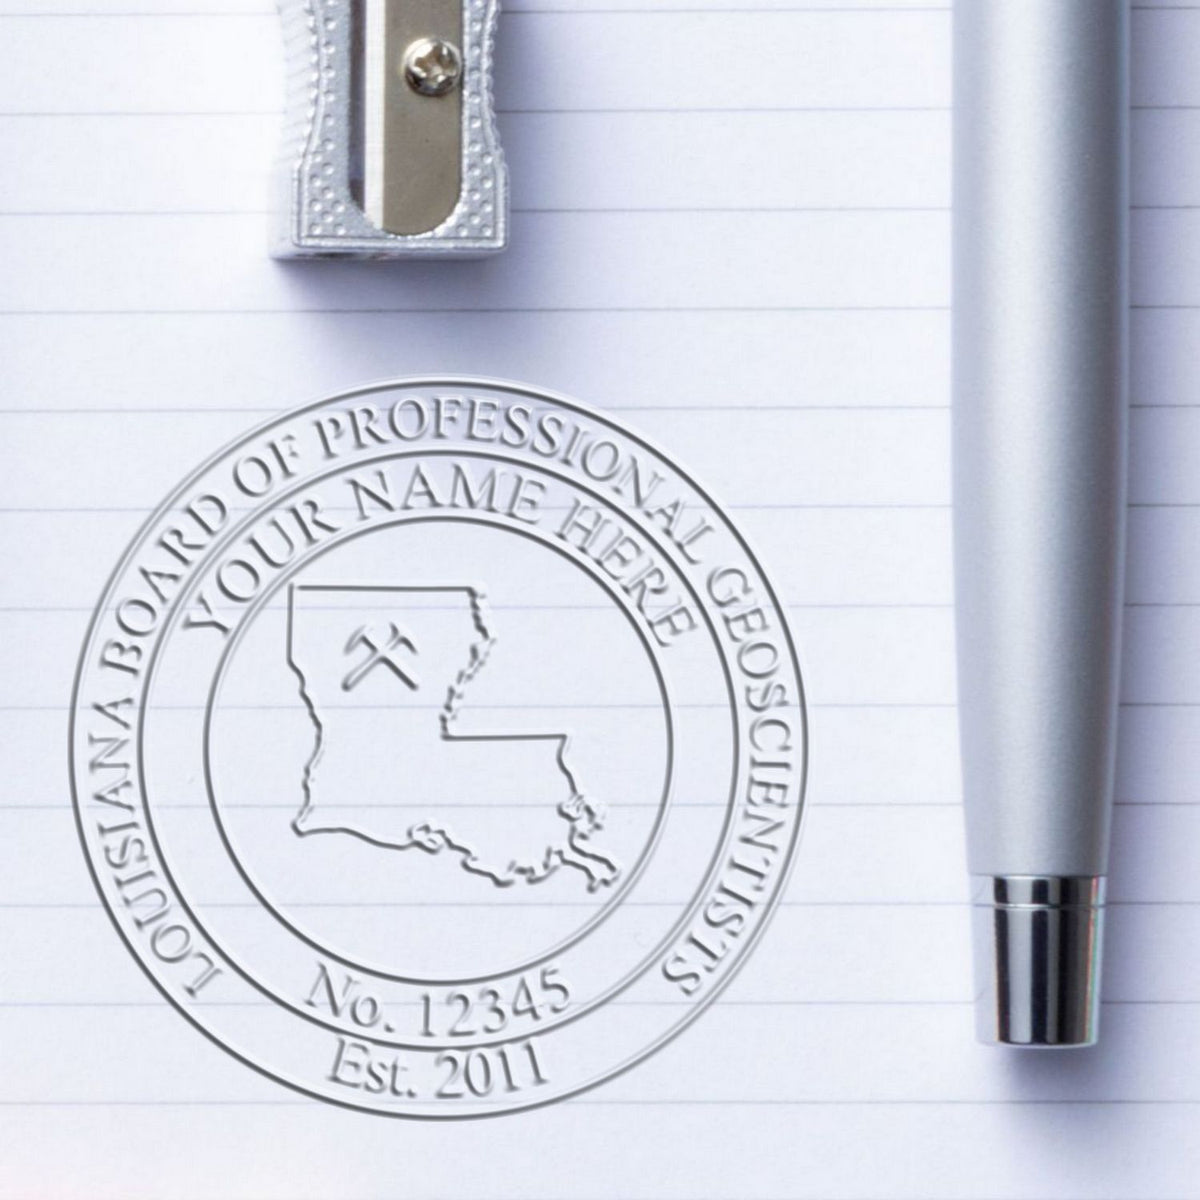 This paper is stamped with a sample imprint of the Long Reach Louisiana Geology Seal, signifying its quality and reliability.